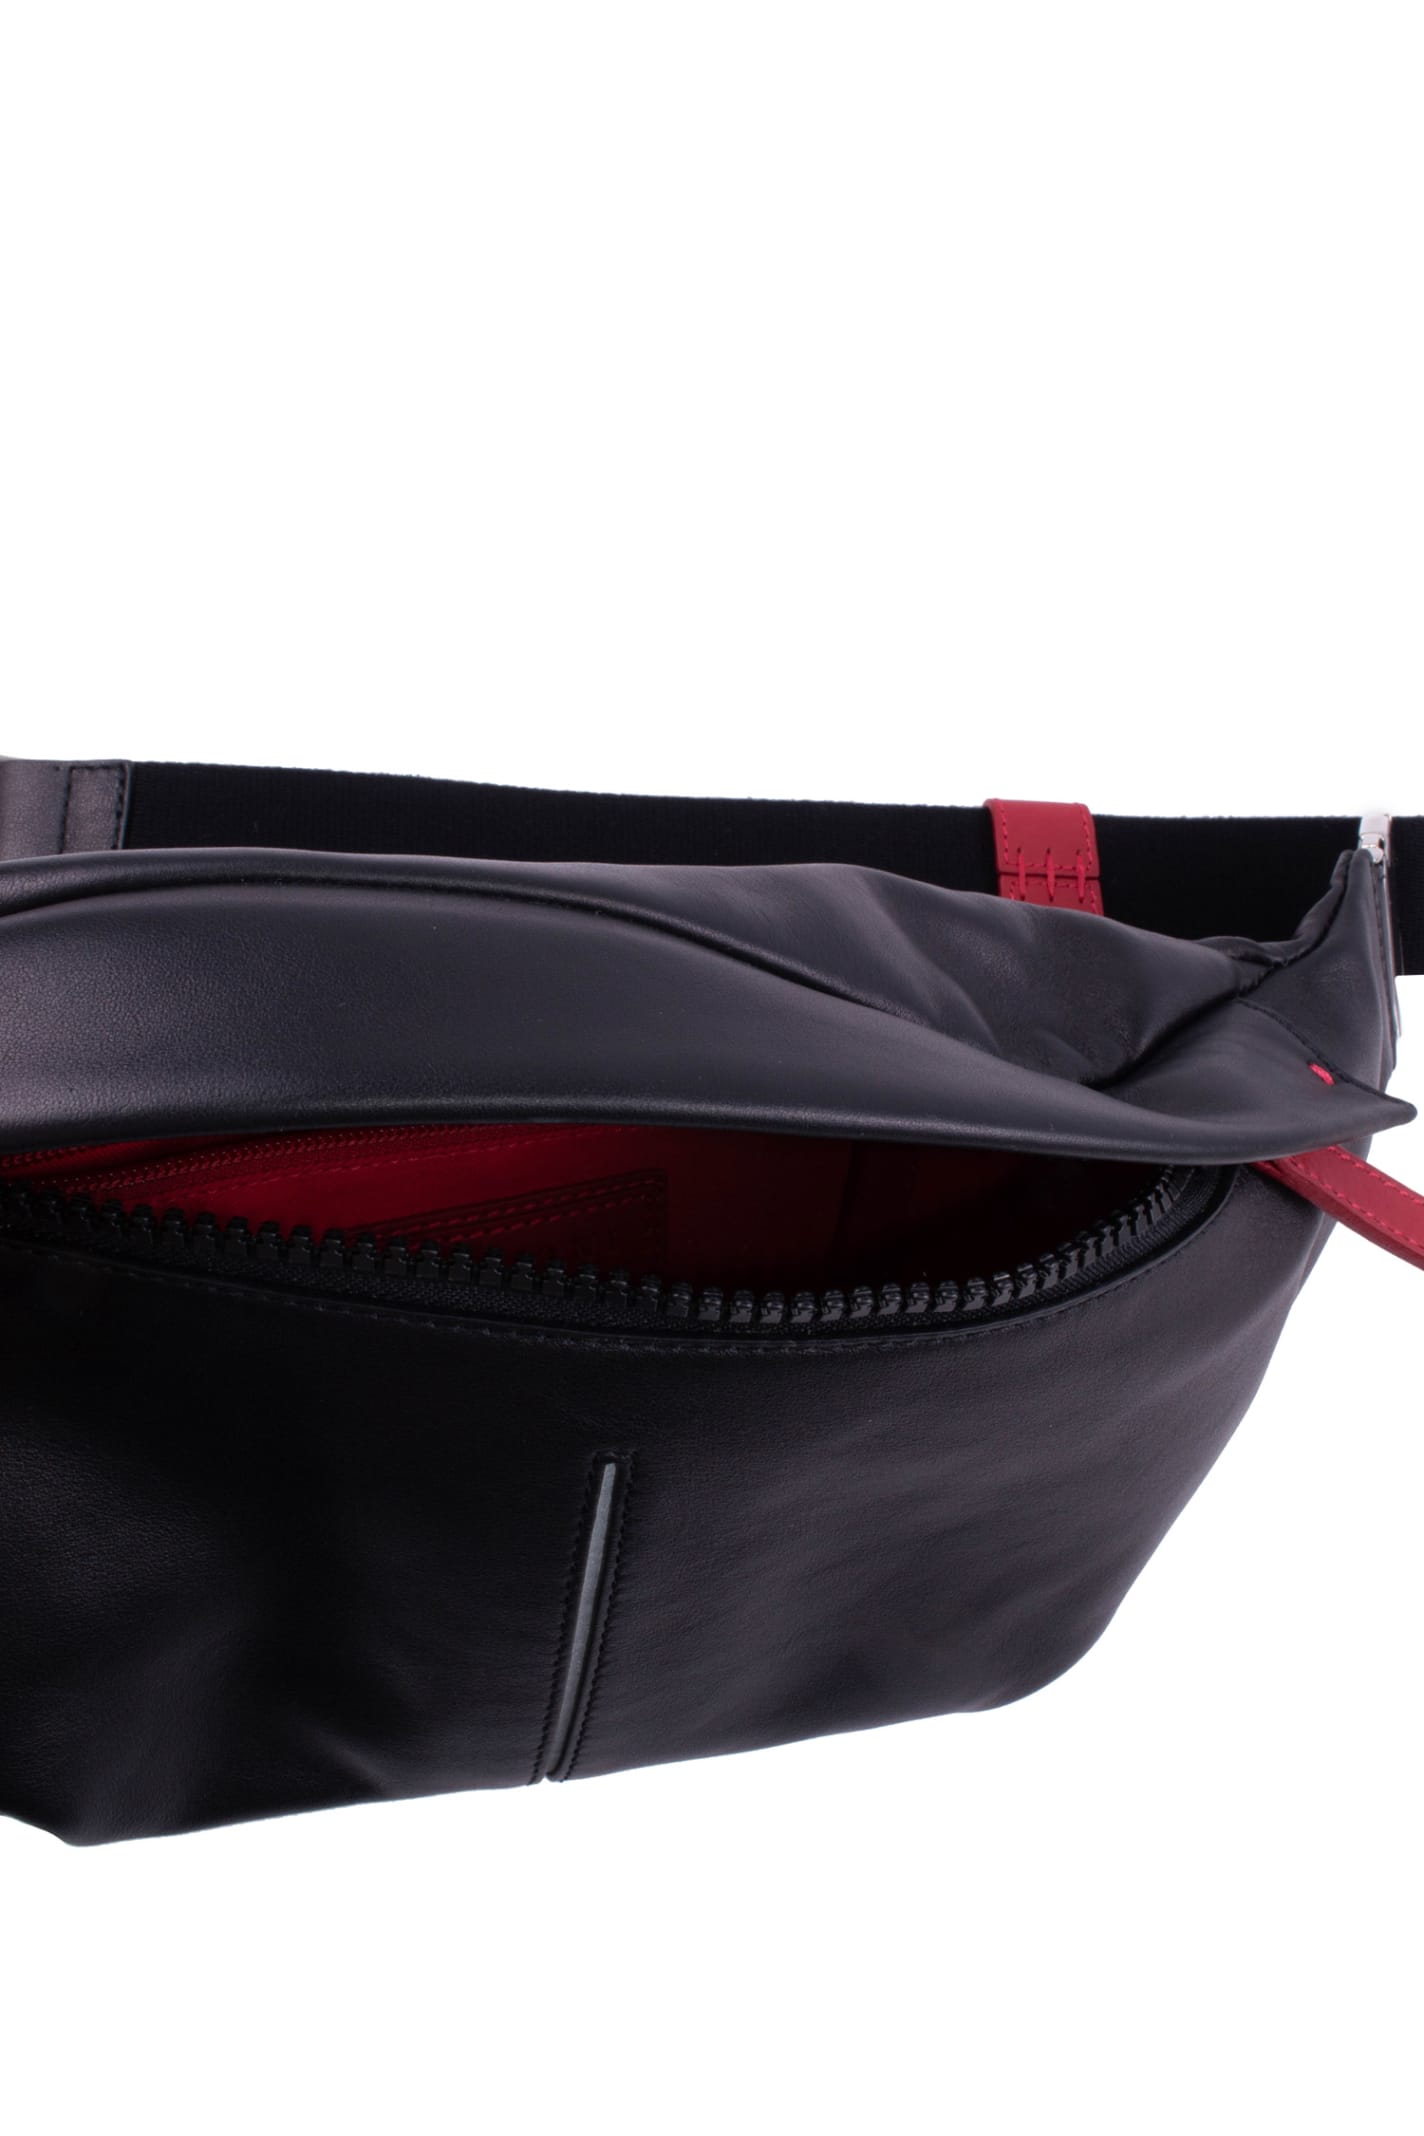 Shop Orciani Leather Pouch In Black